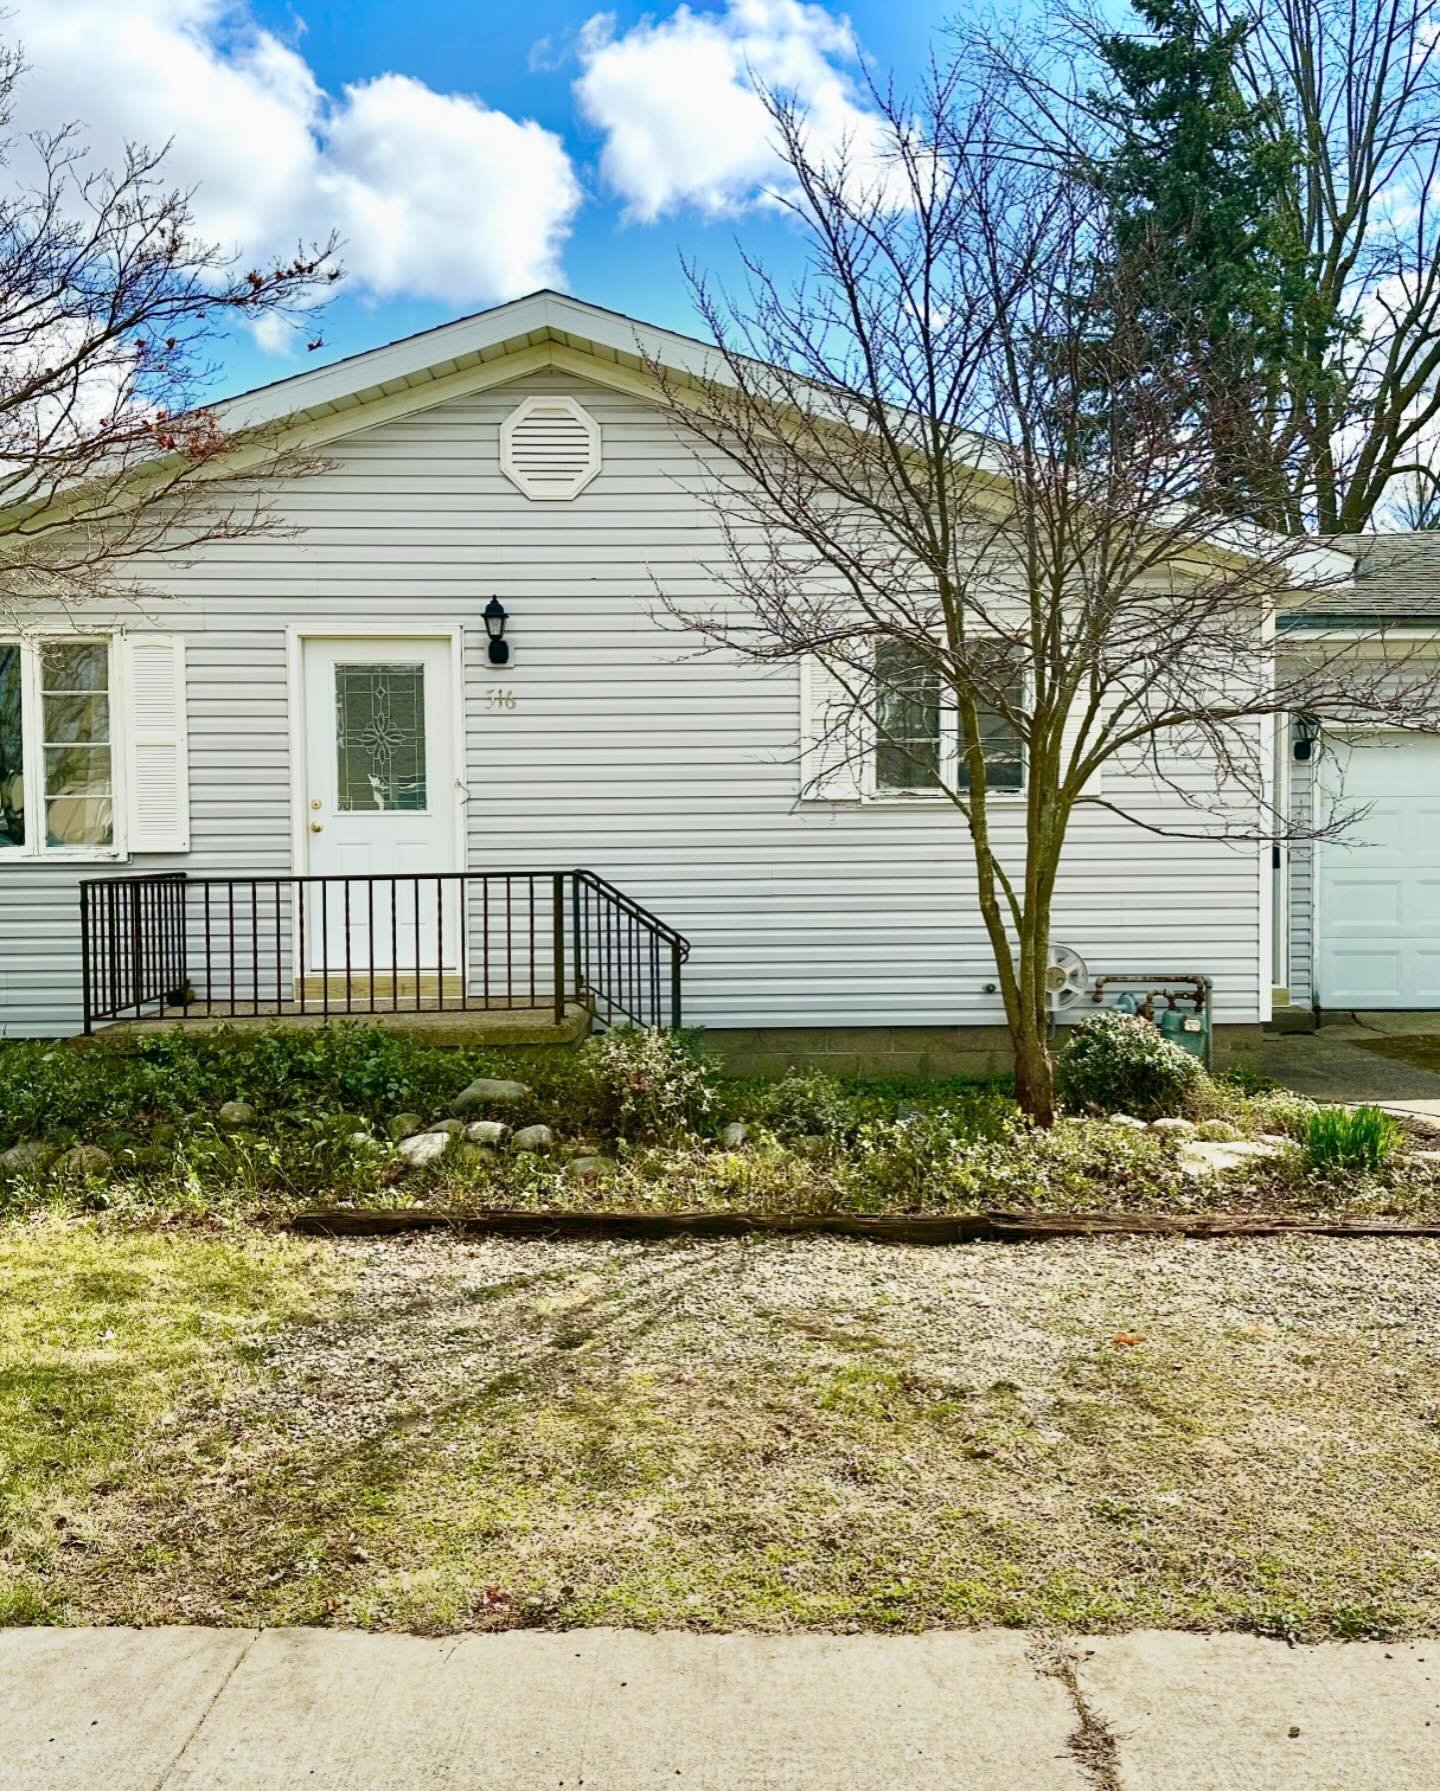 Join us Saturday, April 27, 2024 for an Open House at 516 New York Street, Goshen, IN, from 10 am to 12 pm. Please call Craig Blough, Broker, Auctioneer, 574-238-1816 with any questions